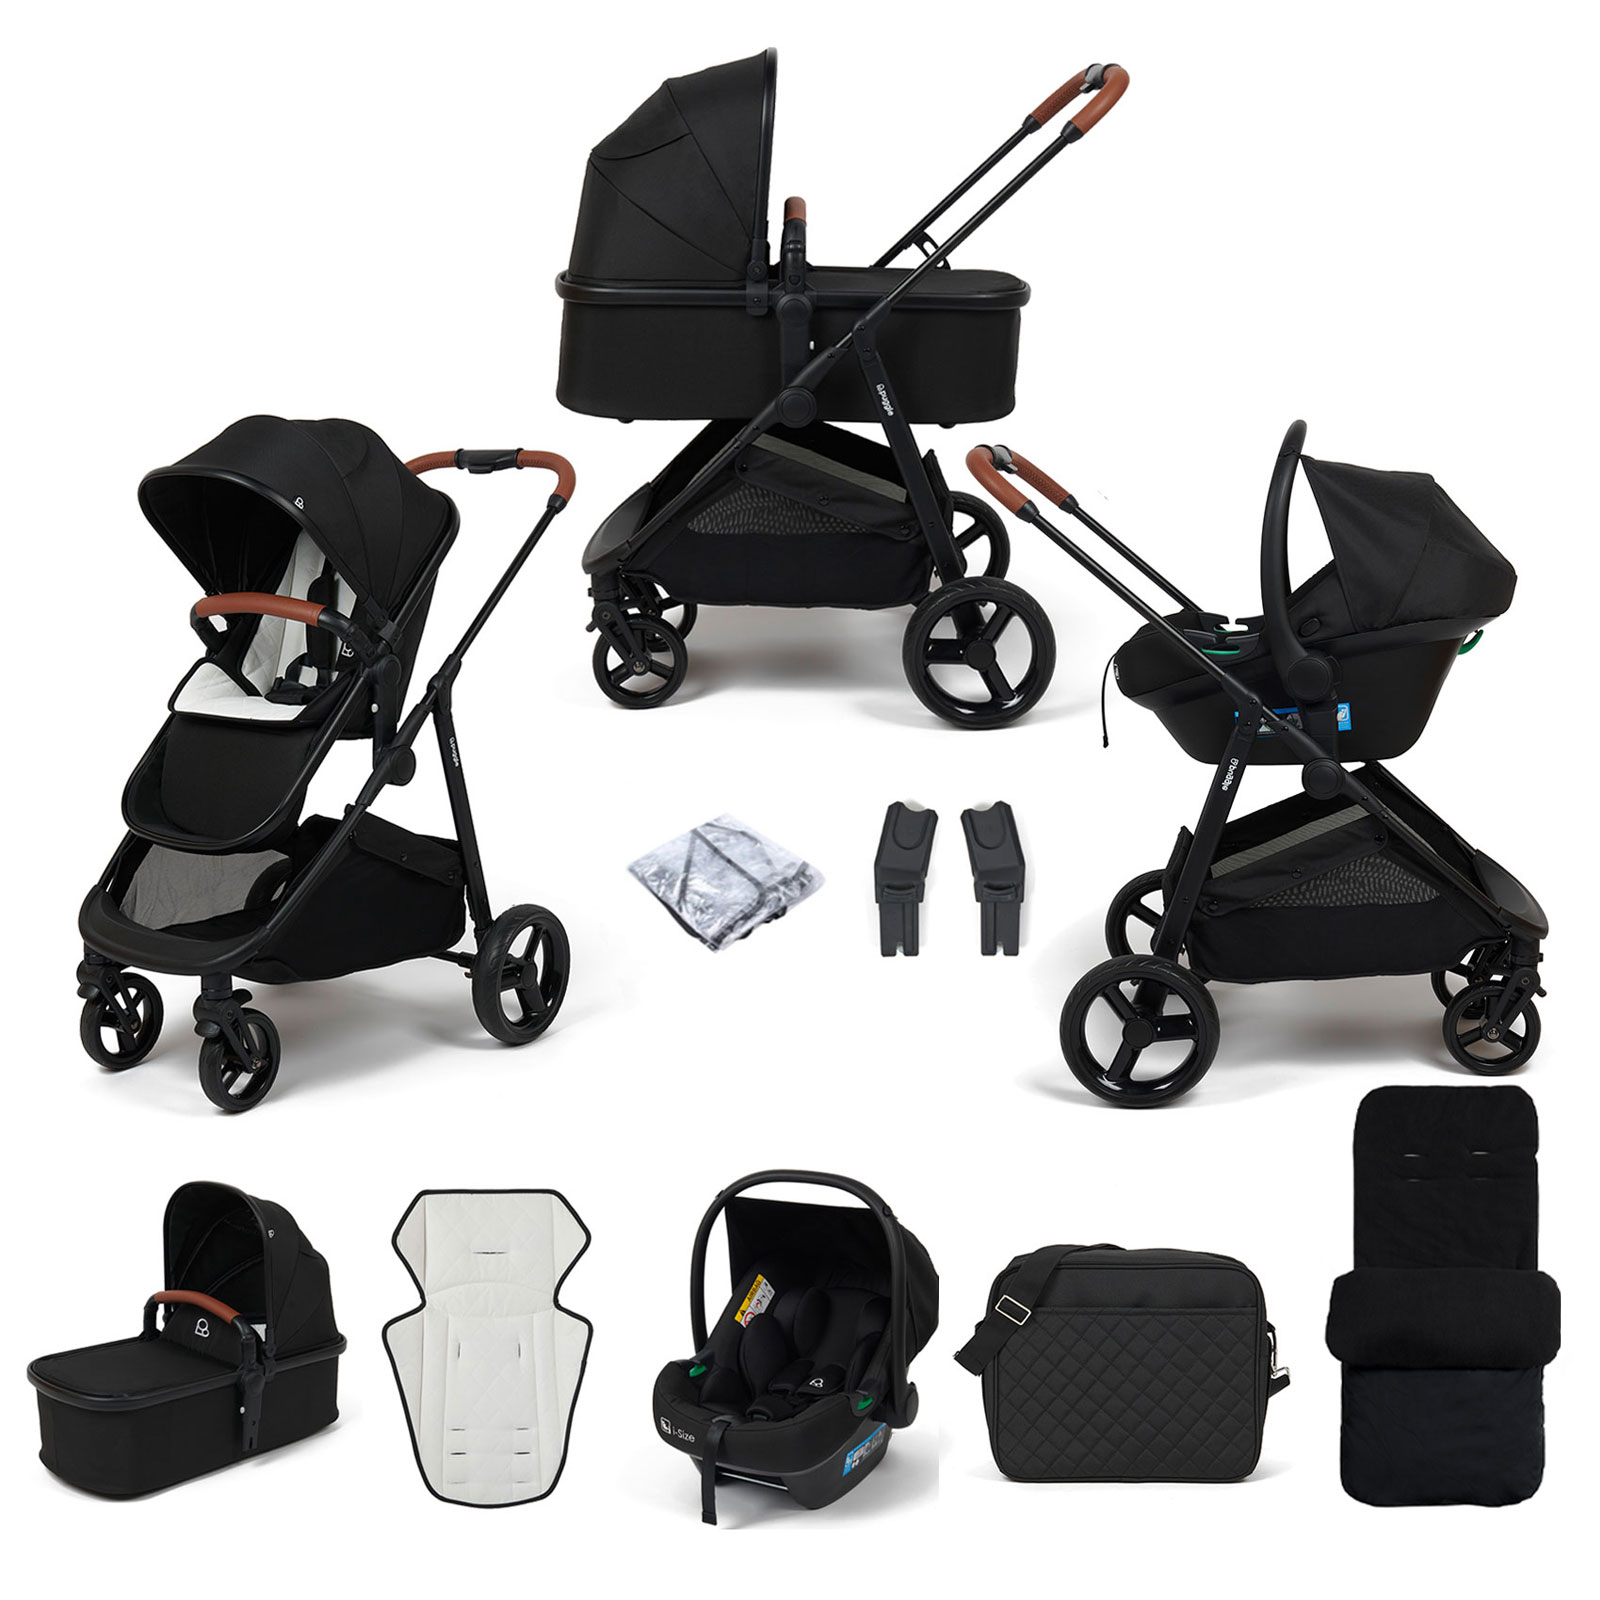 Puggle Monaco XT 3in1 i-Size Travel System with Changing Bag & Deluxe Footmuff - Storm Black